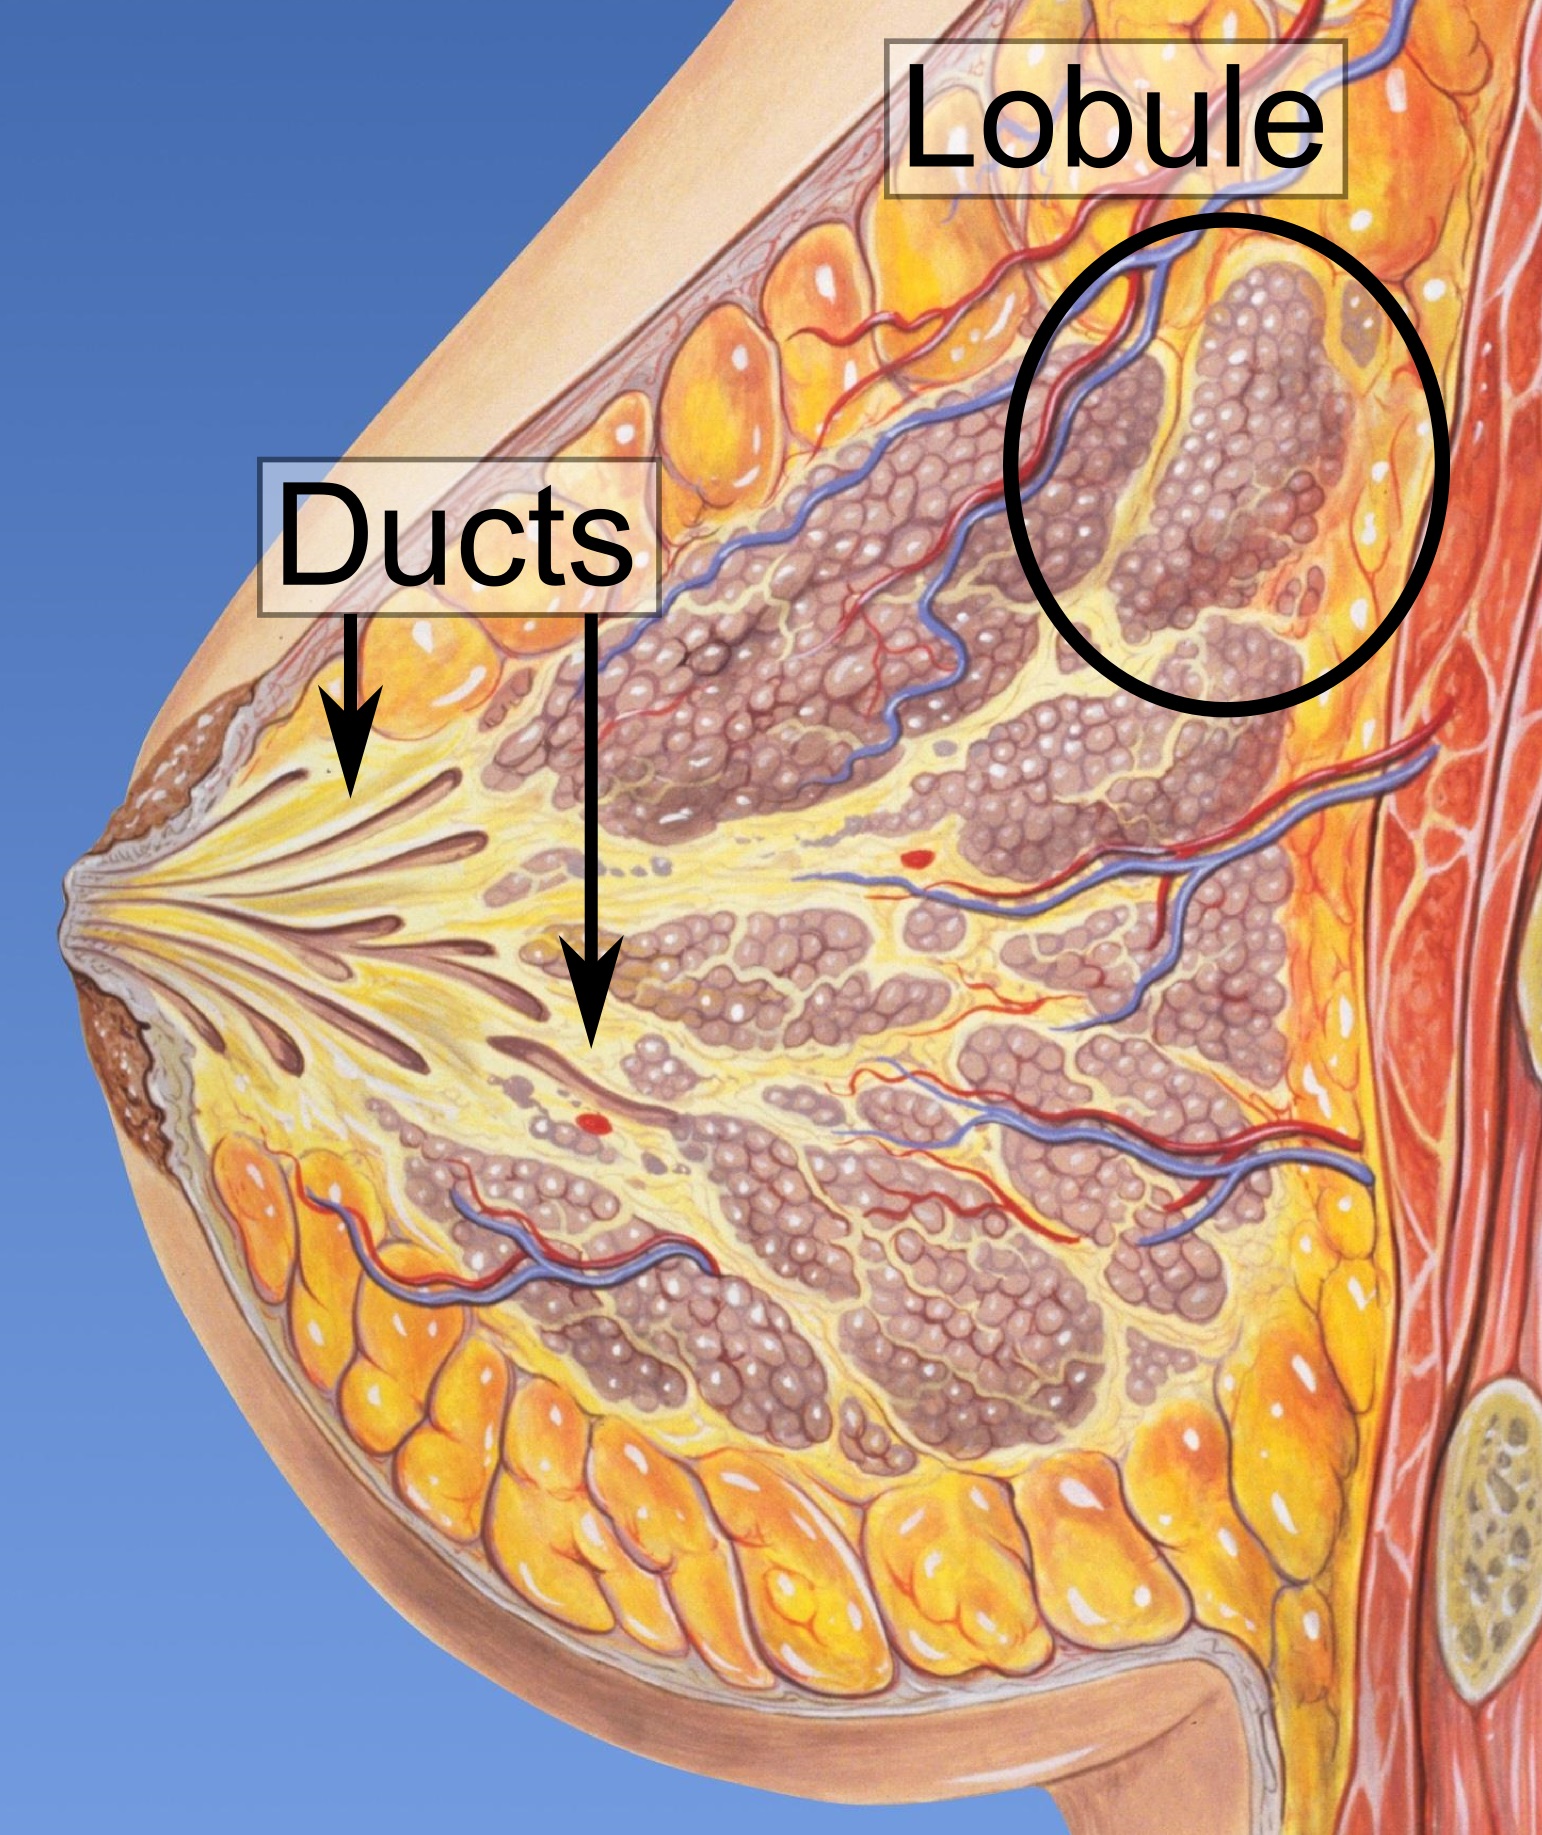 Ductal carcinoma in situ (DCIS)